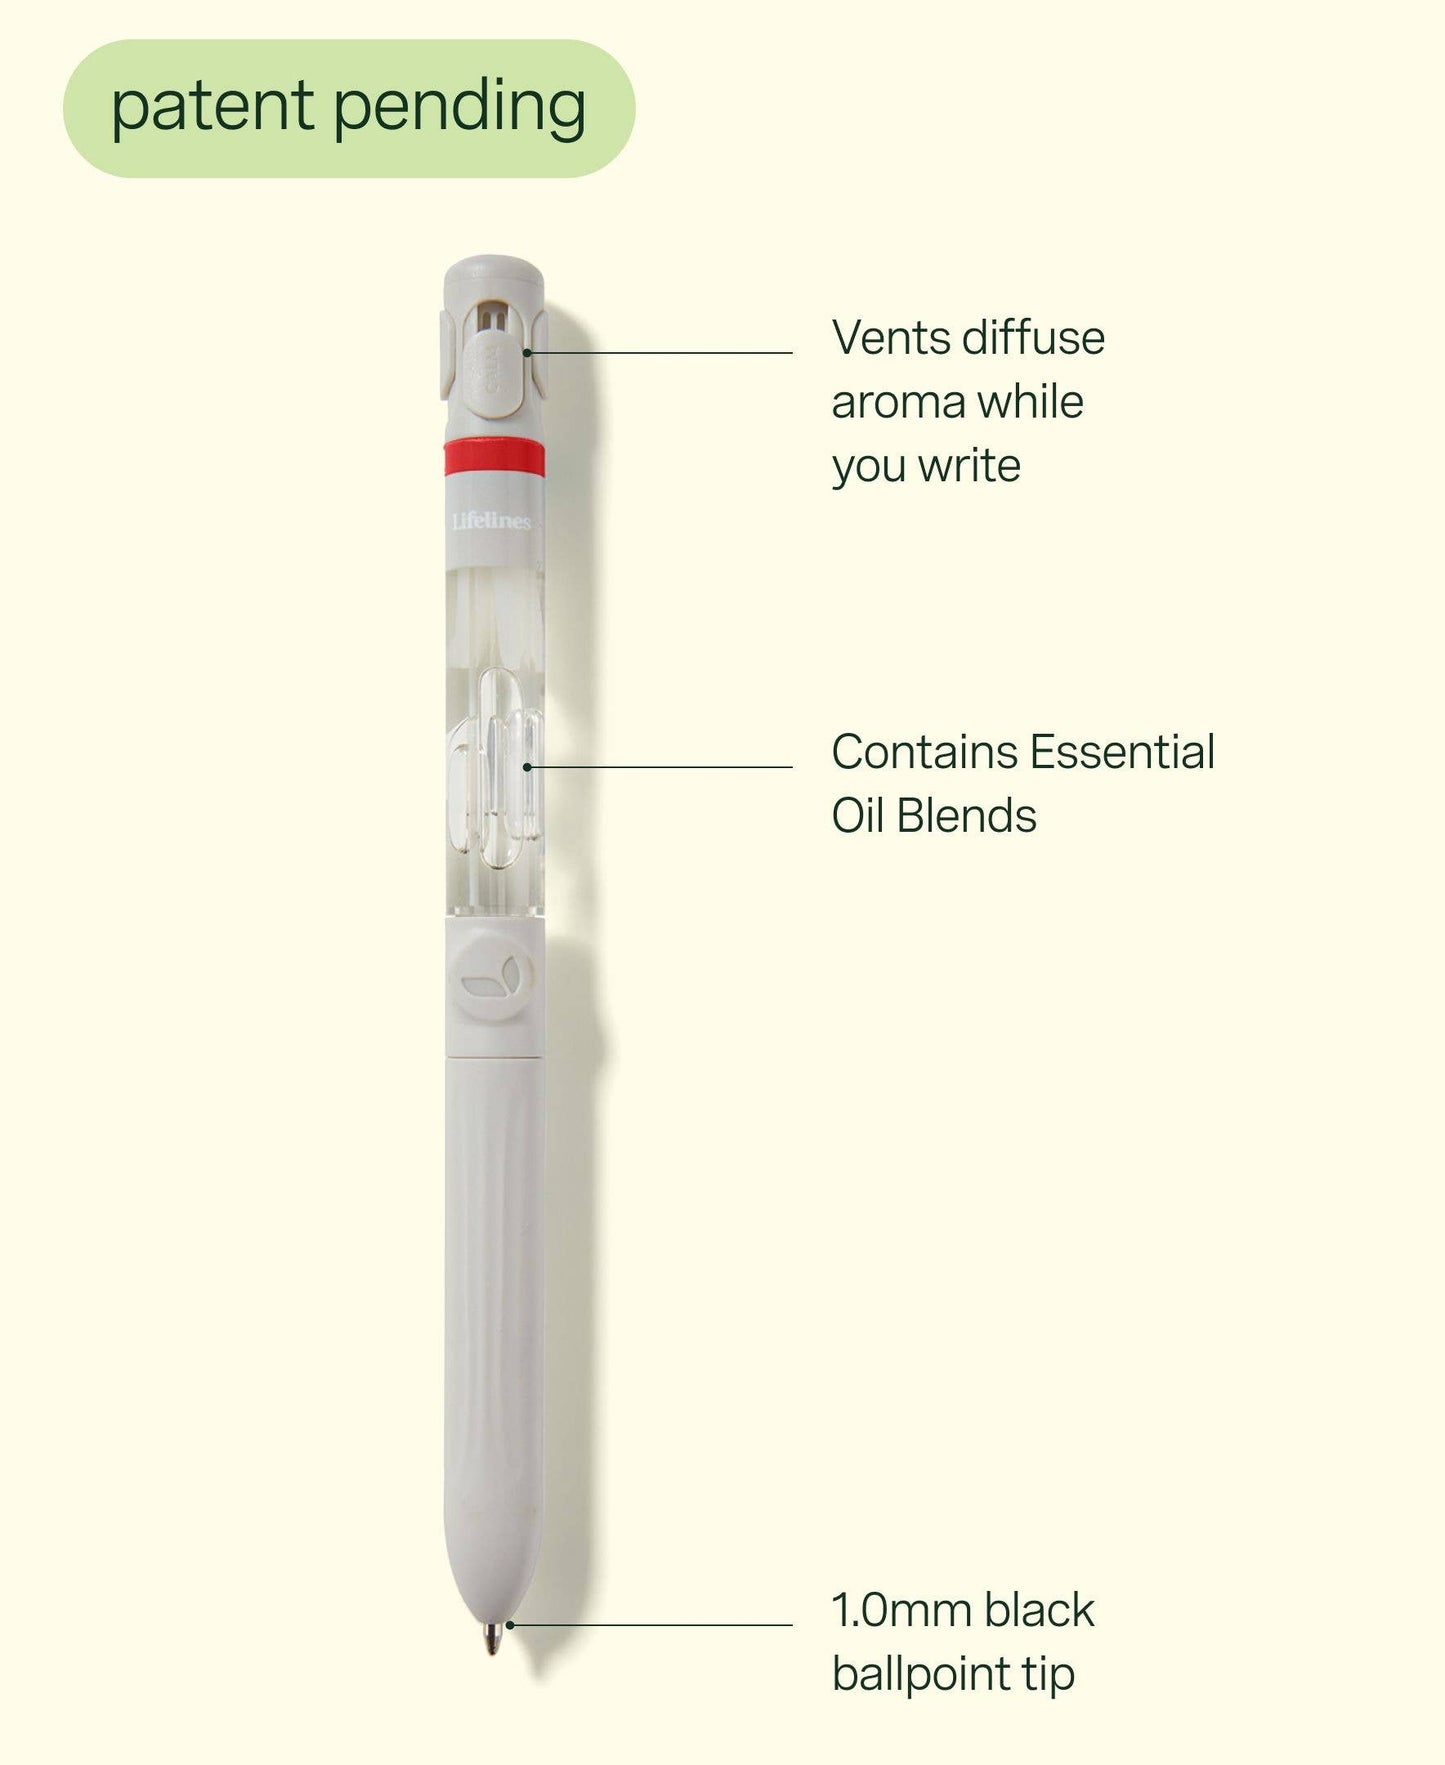 Lifelines Pen Diffuser with Essential Oil Blends - Spice